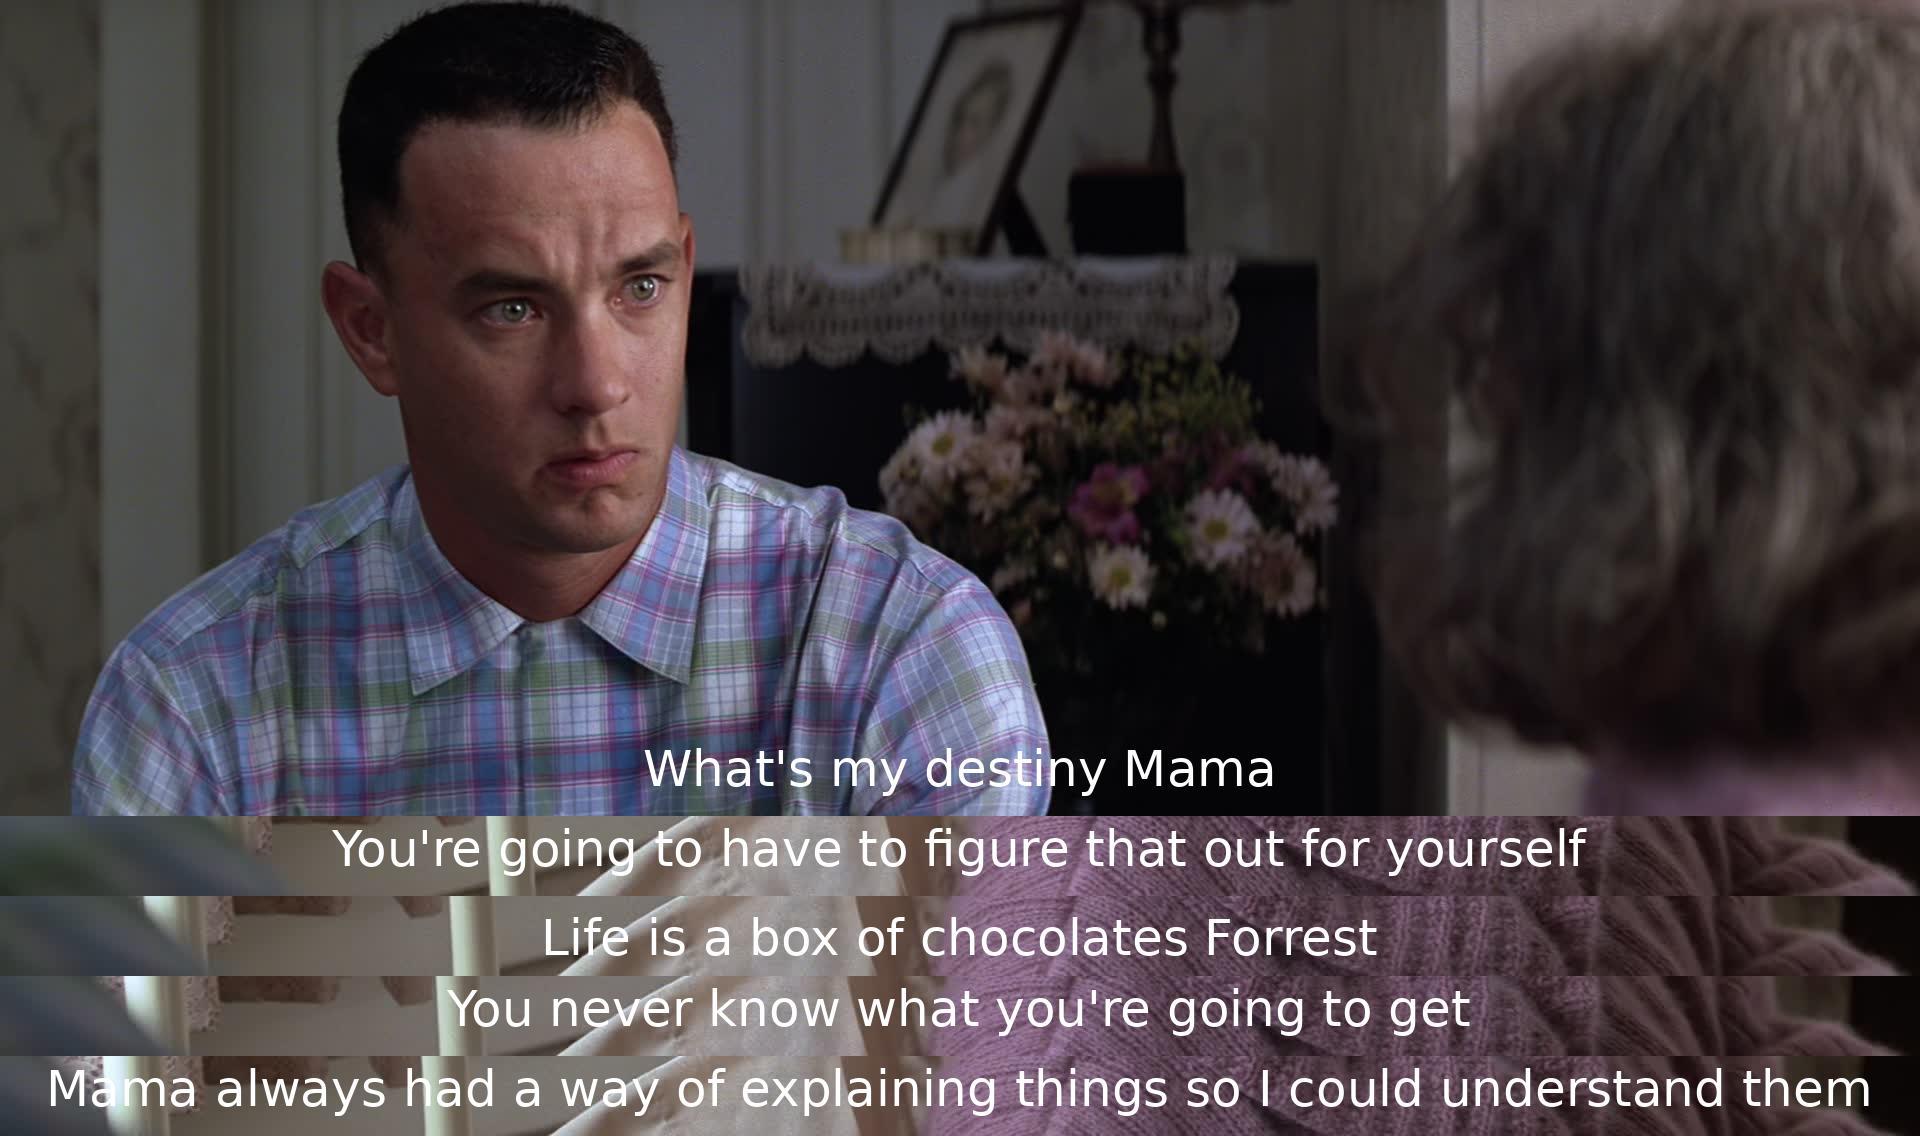 A conversation between a son and his mother reveals a message about the uncertainty of life. The mother encourages him to determine his own destiny, using a metaphor of life being like a box of chocolates - full of surprises and unknown outcomes.